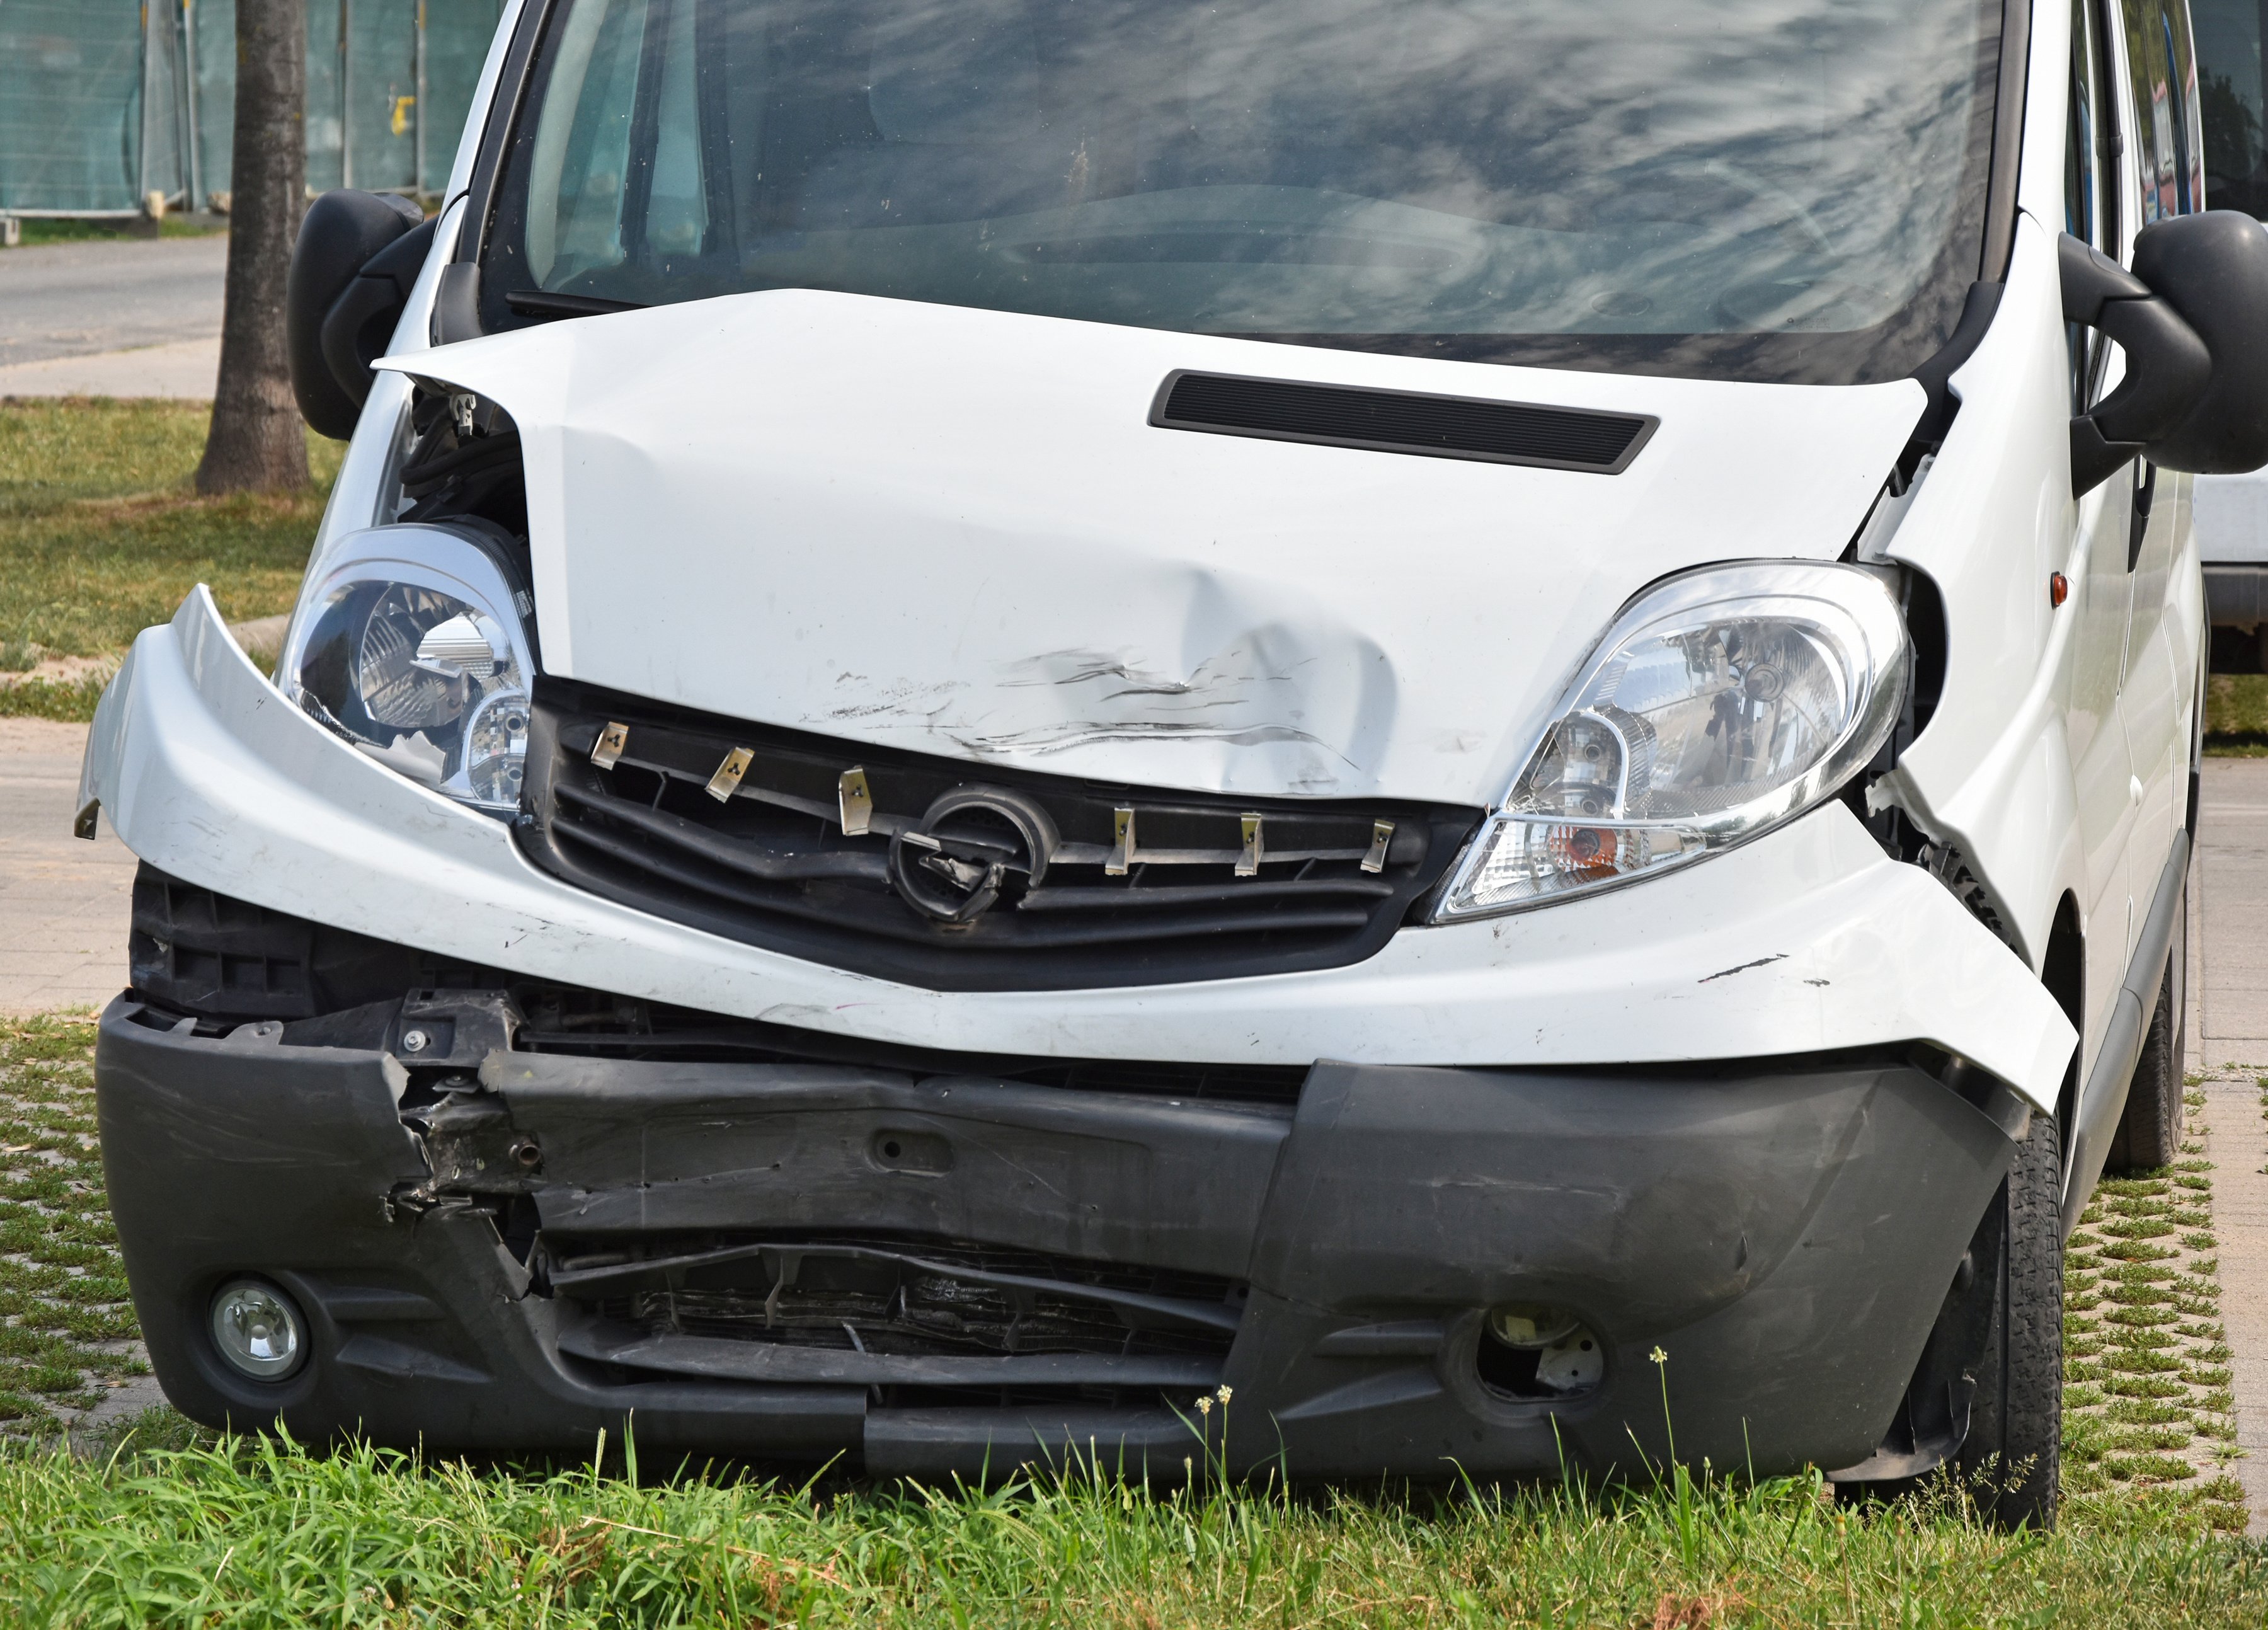 NAVIGATING THE UNEXPECTED: WHAT TO DO IF YOU ARE INVOLVED IN A COLLISION